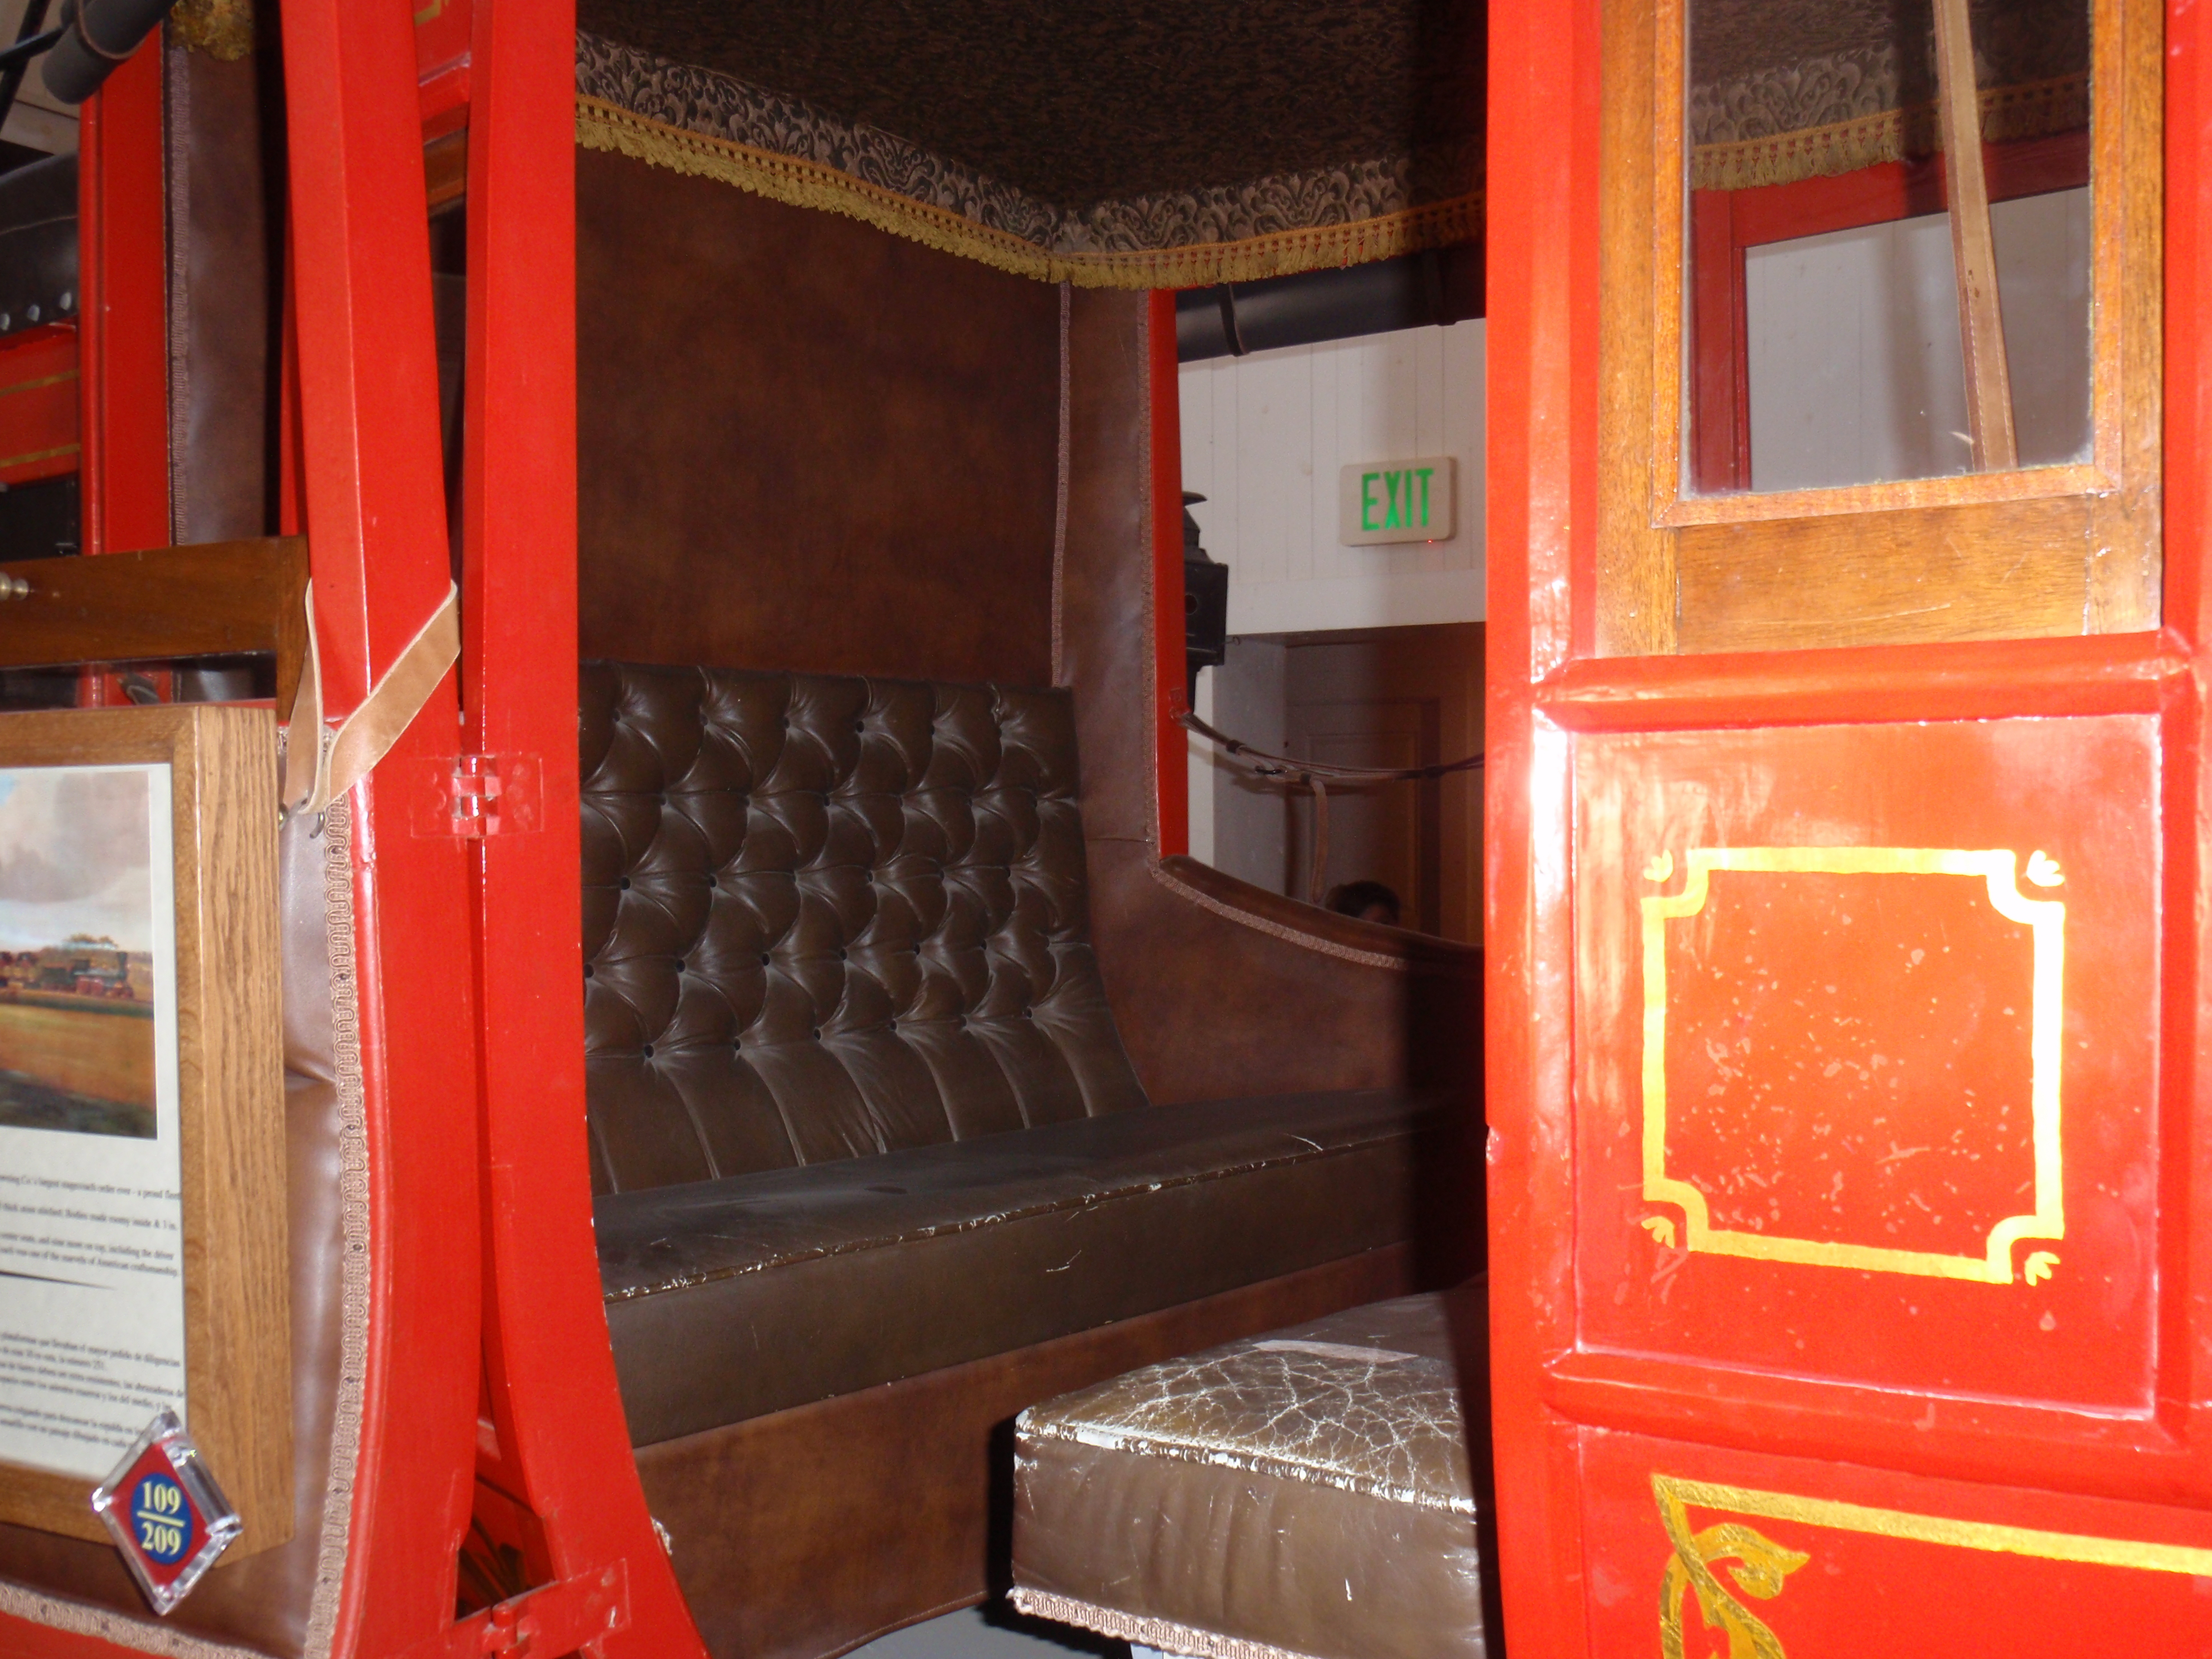 Interior of Concord stagecoach at Wells Fargo's San Diego museum. Imagine sharing that bench for the 24 day run from St. Louis to San Francisco. Photo by James Ulvog.